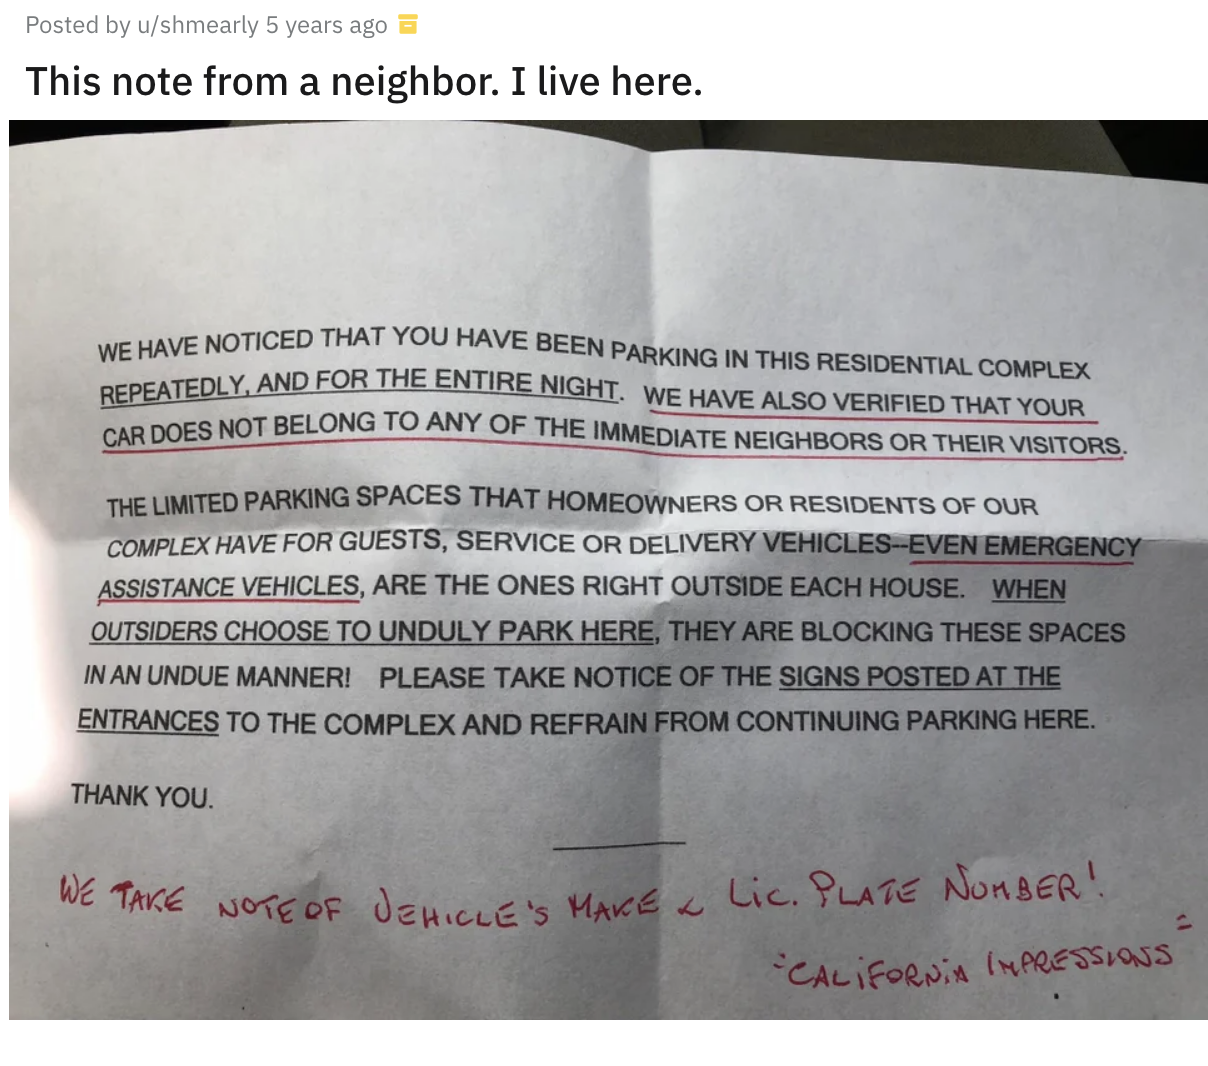 A note from a neighbor inquiring about a car